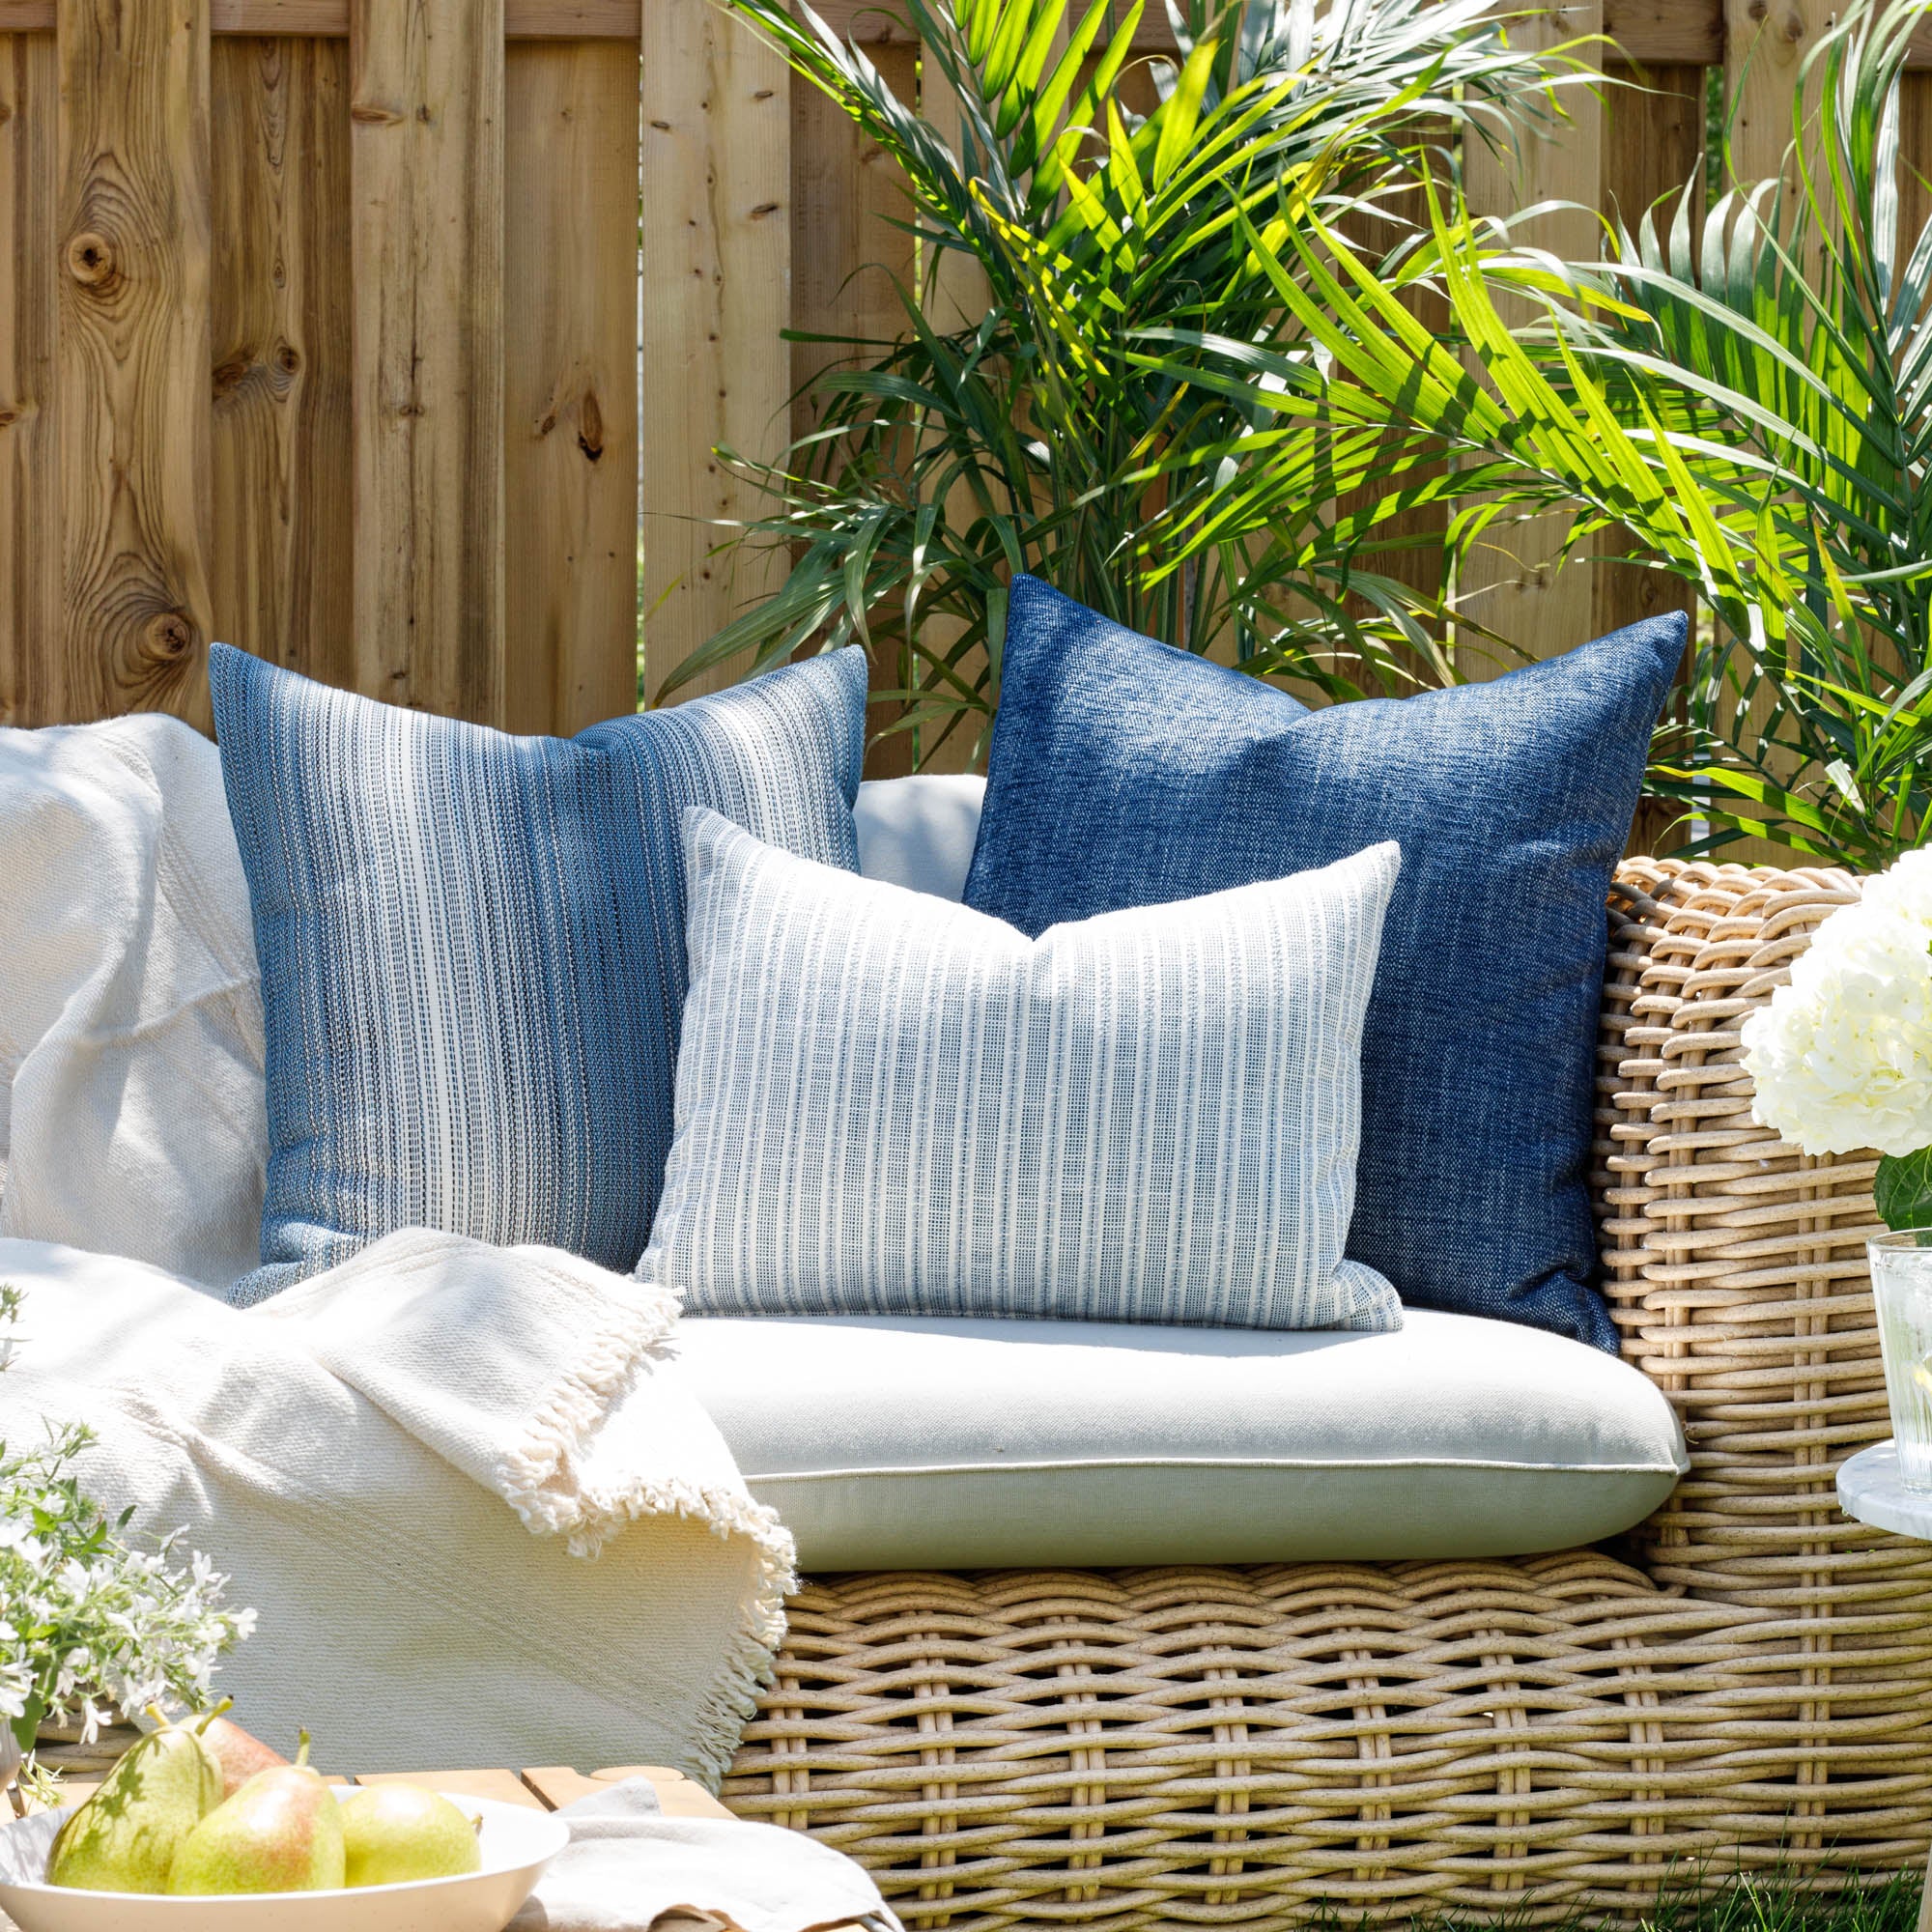 Blue and white outdoor throw pillows from Tonic Living